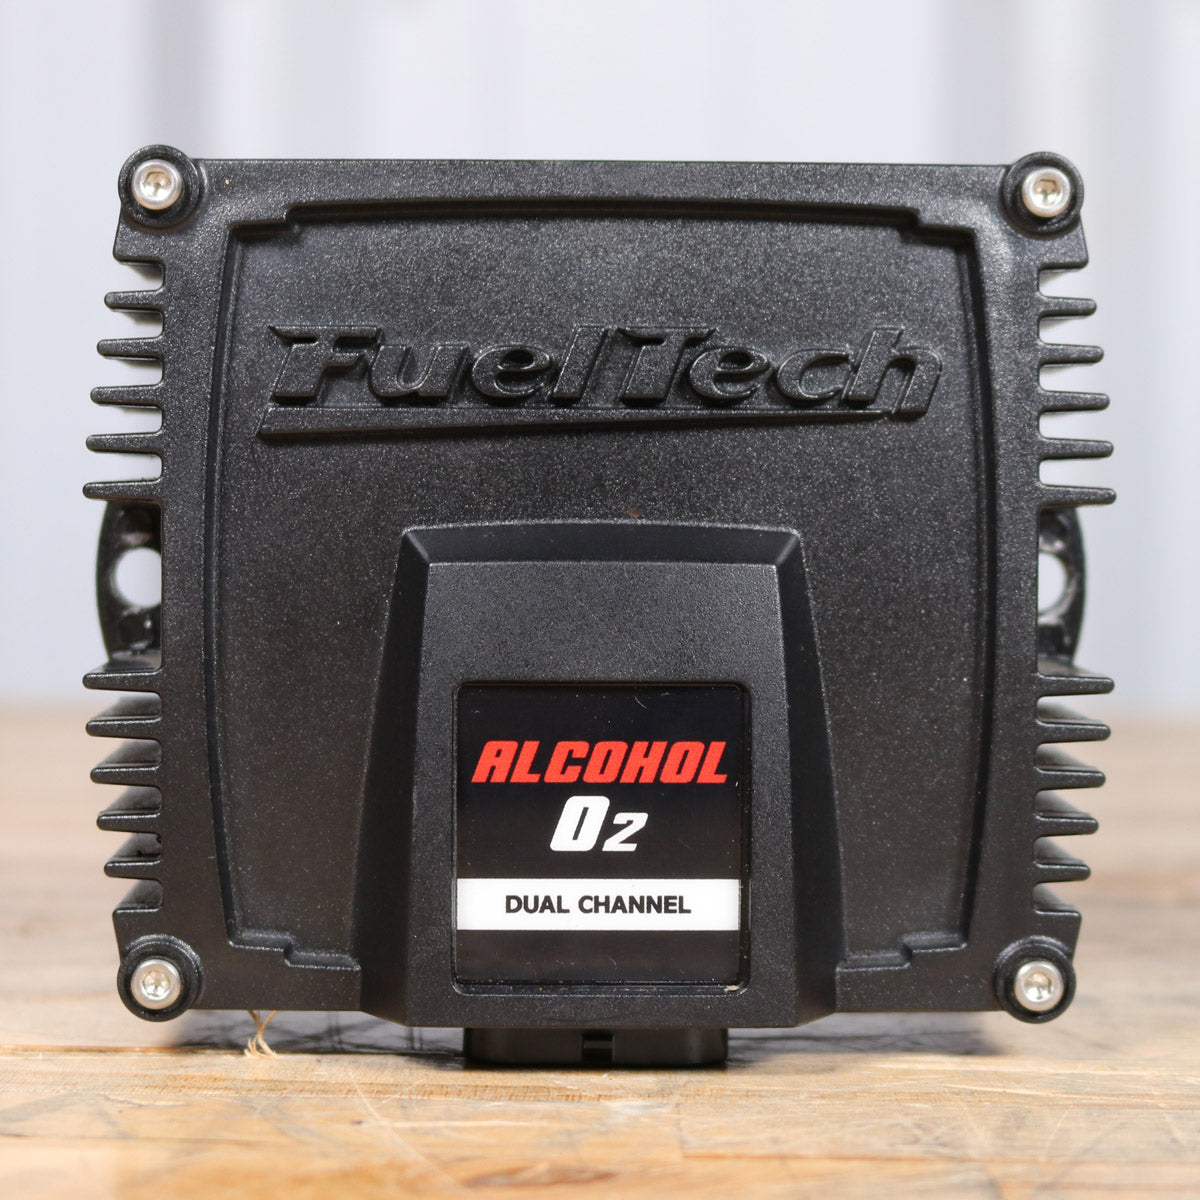 FUELTECH ALCOHOL O2, DUAL CHANNEL BOX ( NO HARNESS INCLUDED)